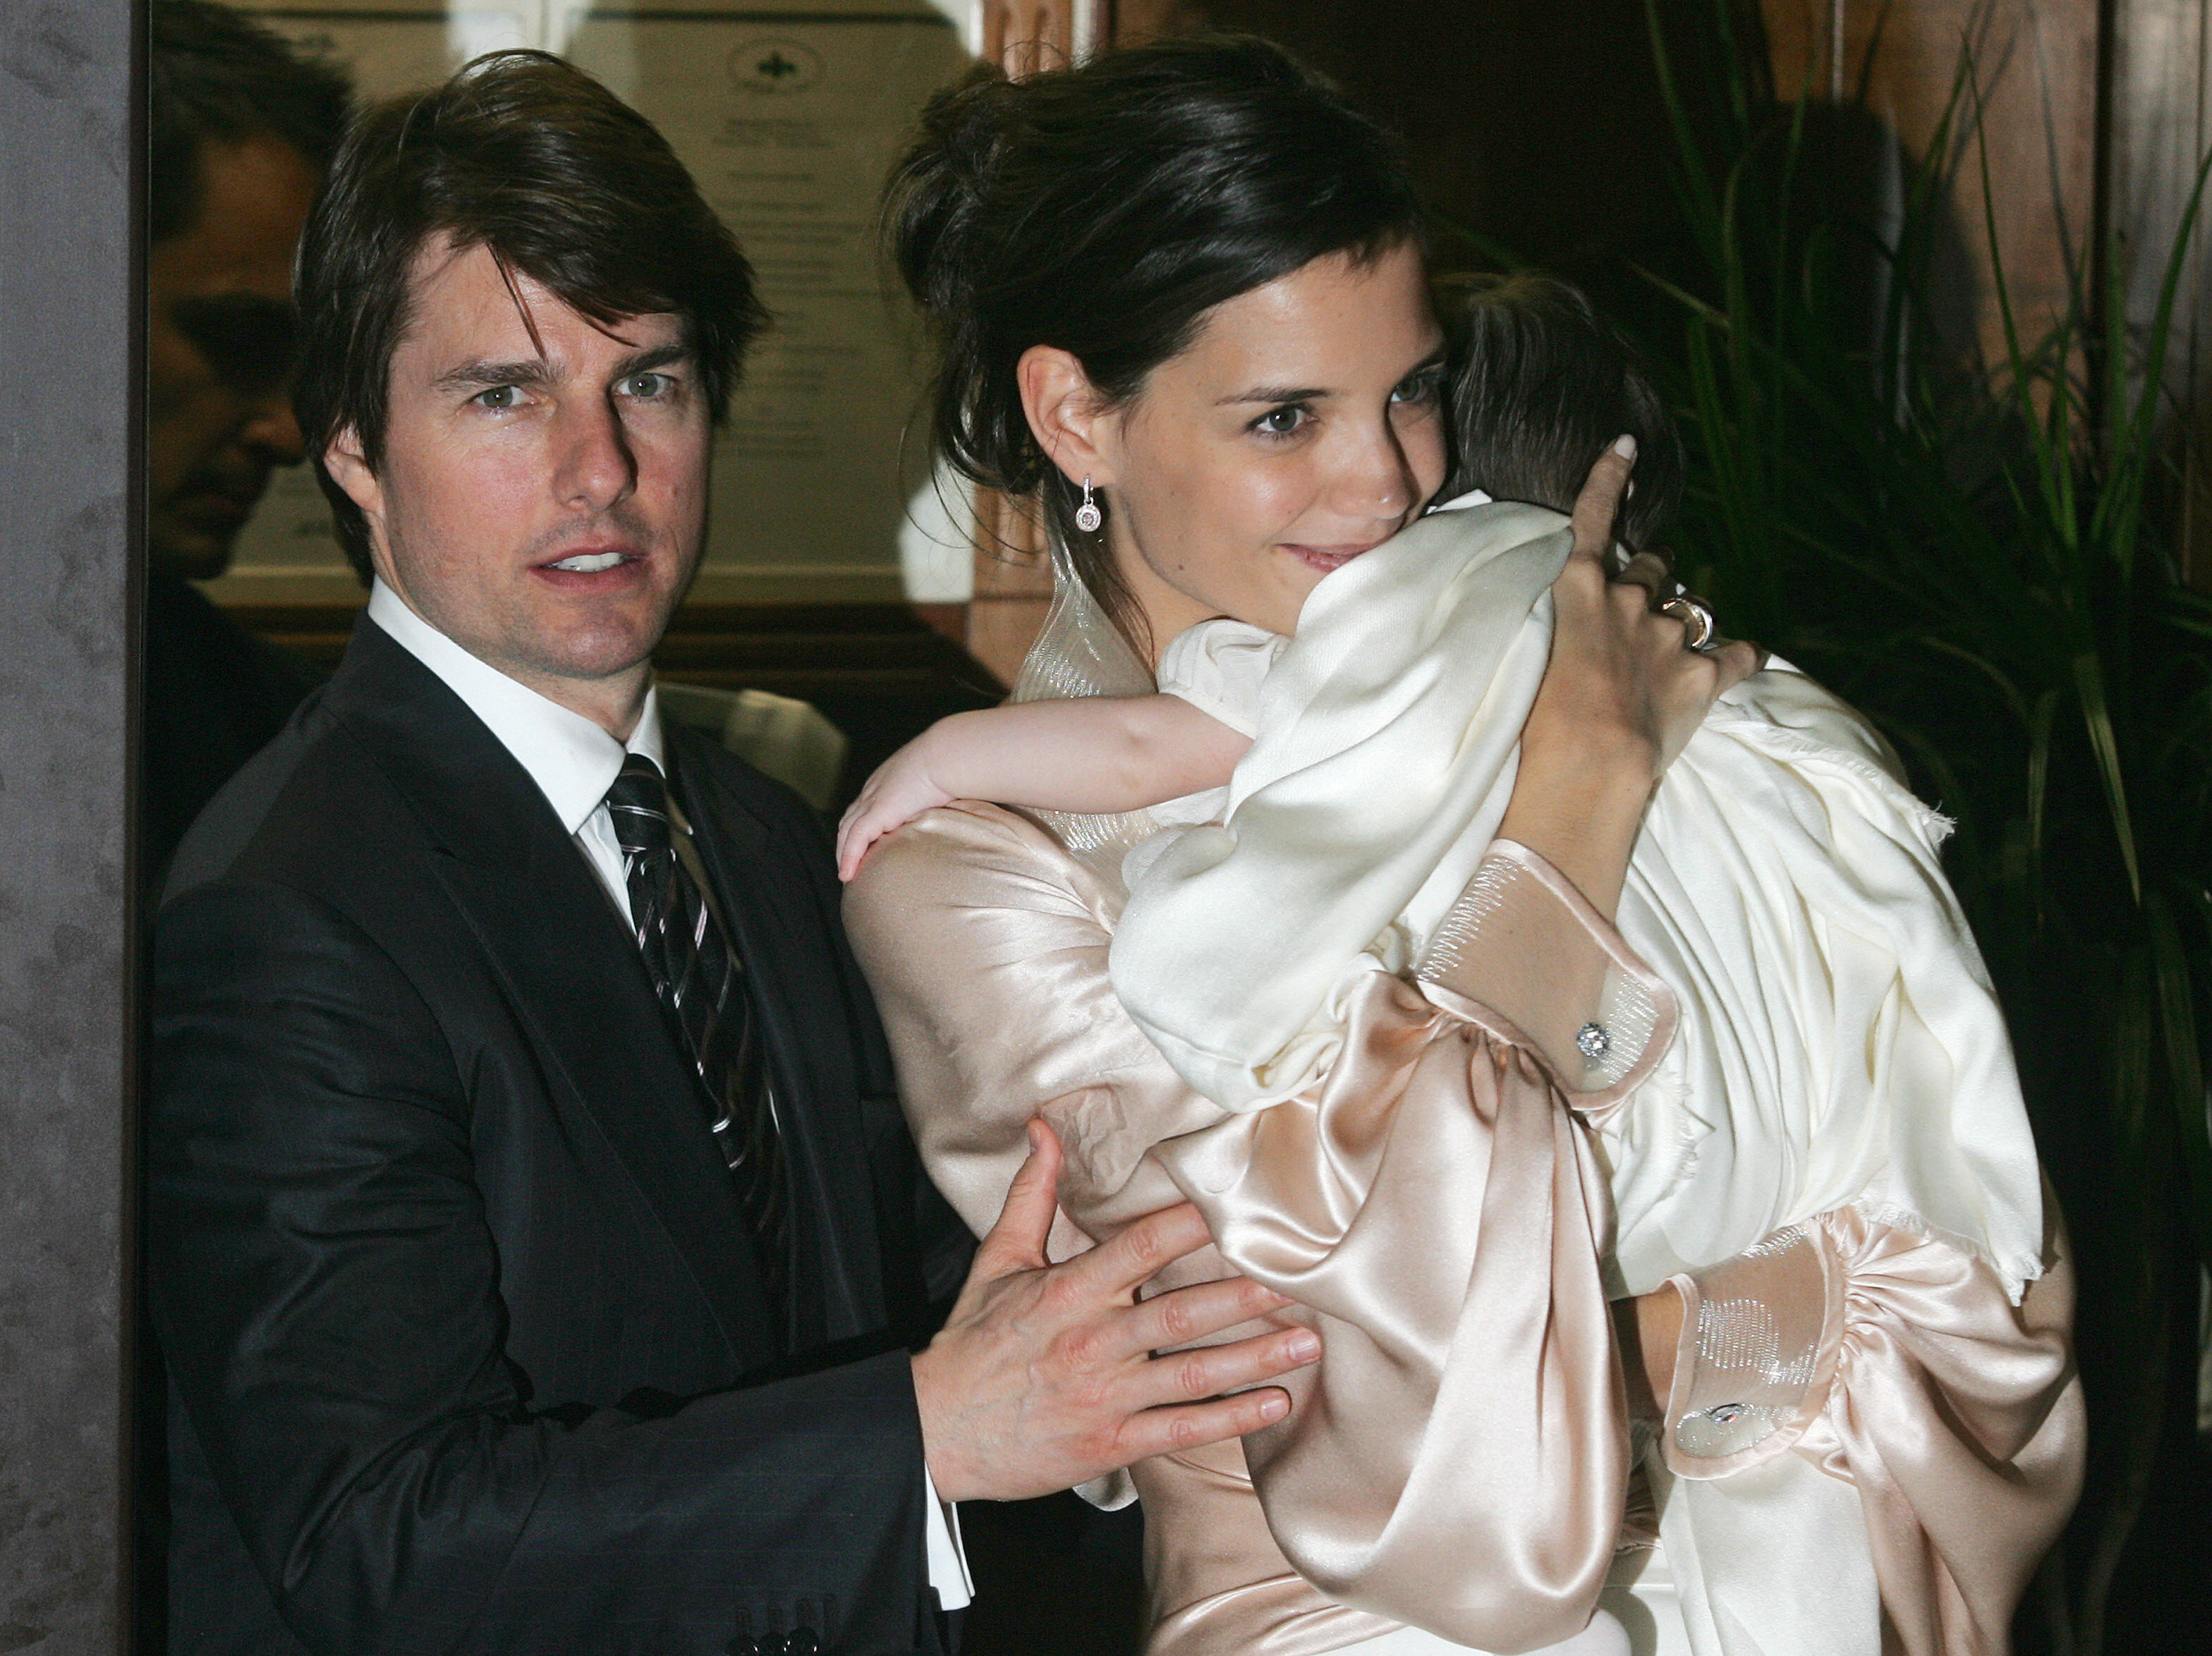 Tom Cruise, Katie Holmes, and Suri Cruise, leaving a restaurant on 17 November 2006 in Rome | Source: Getty Images